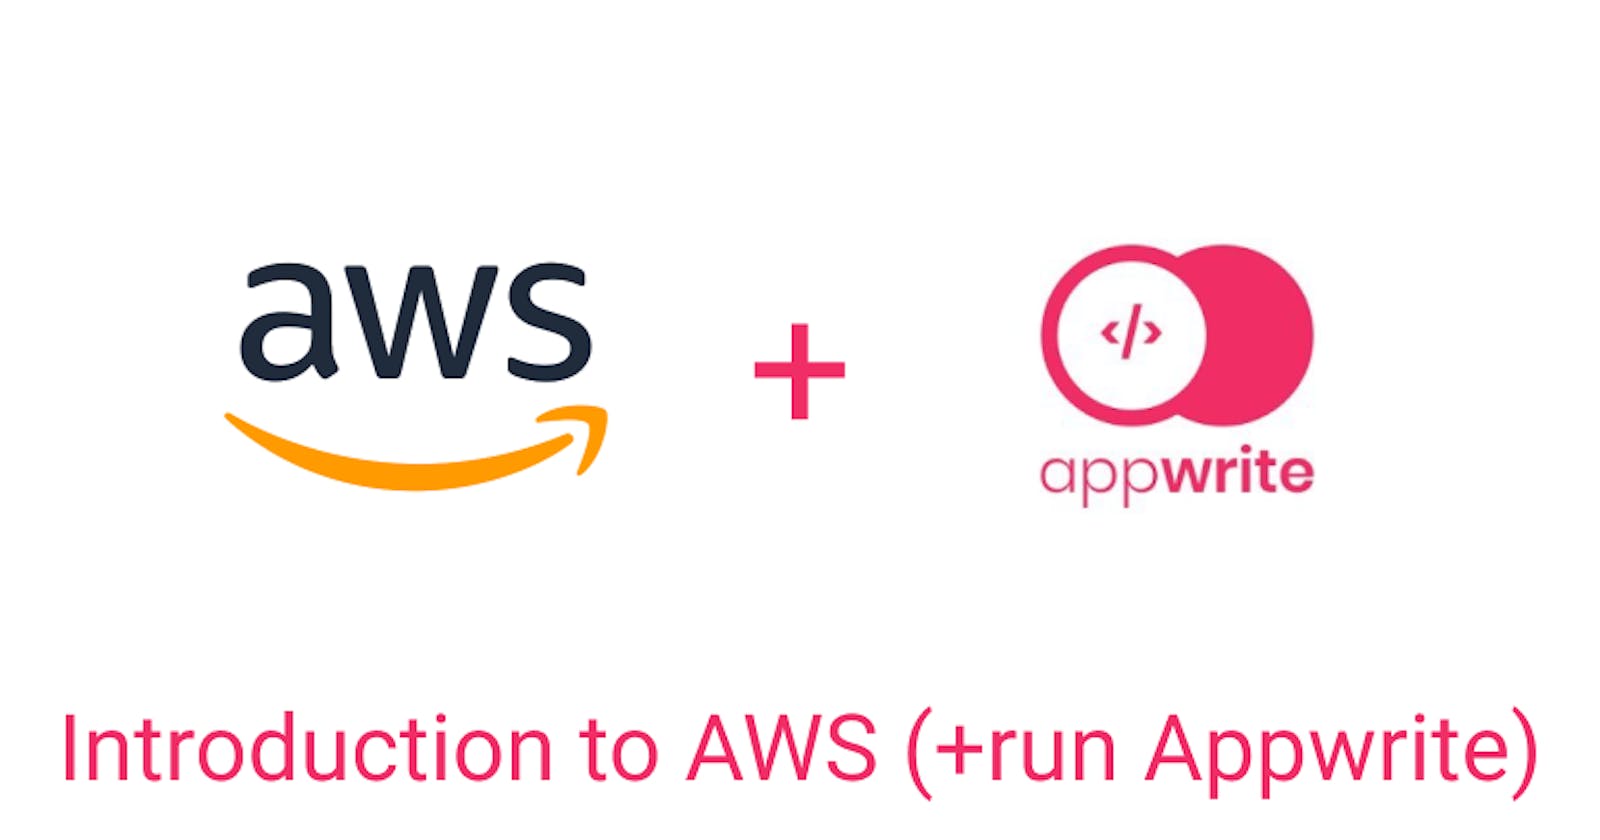 Introduction to AWS (+run Appwrite)